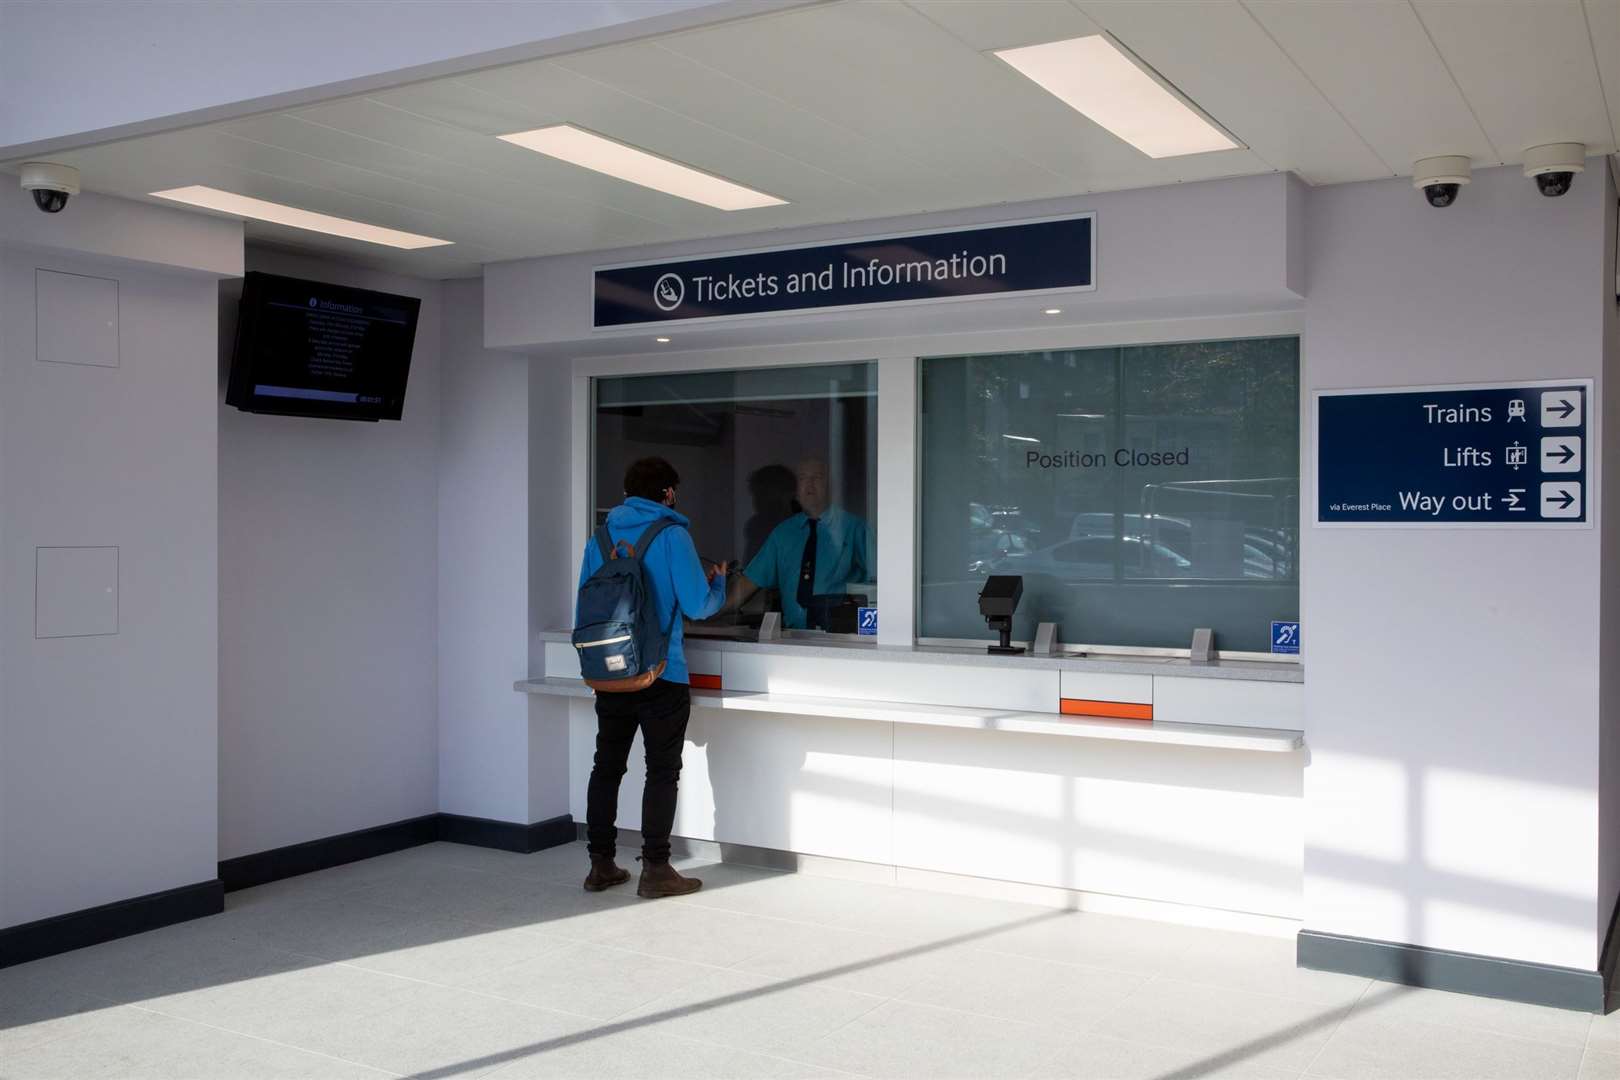 Railway station ticket offices must be kept open, says one passenger. Library picture: Andy Jones/Southeastern